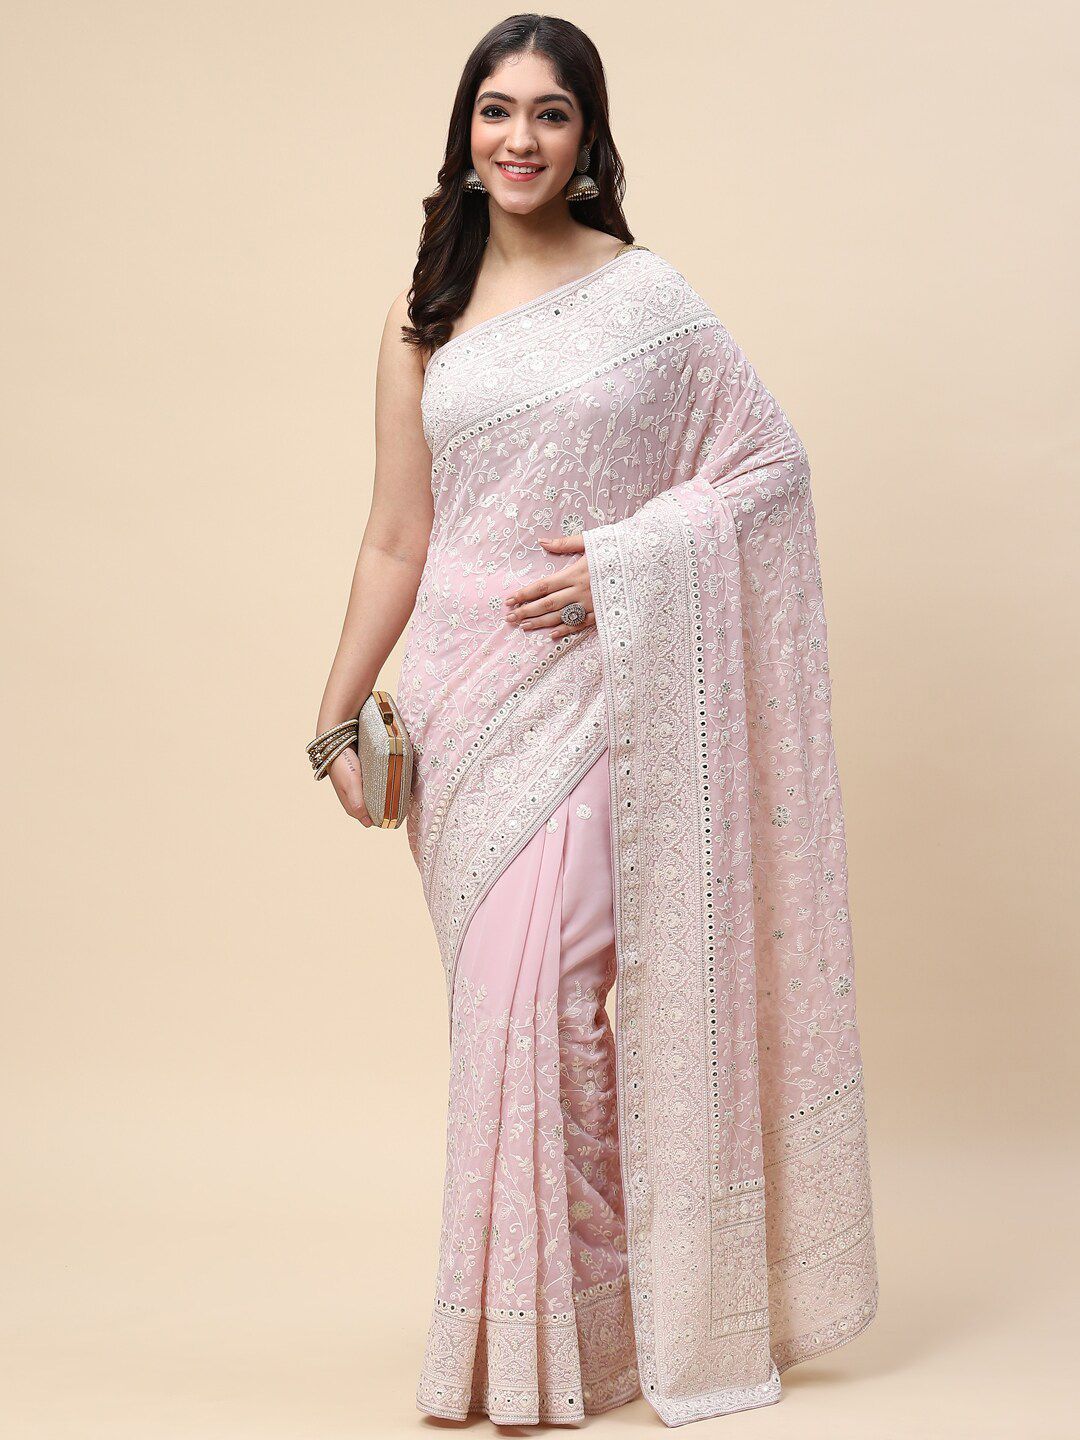 Meena Bazaar Peach-Coloured & White Floral Embroidered Saree Price in India